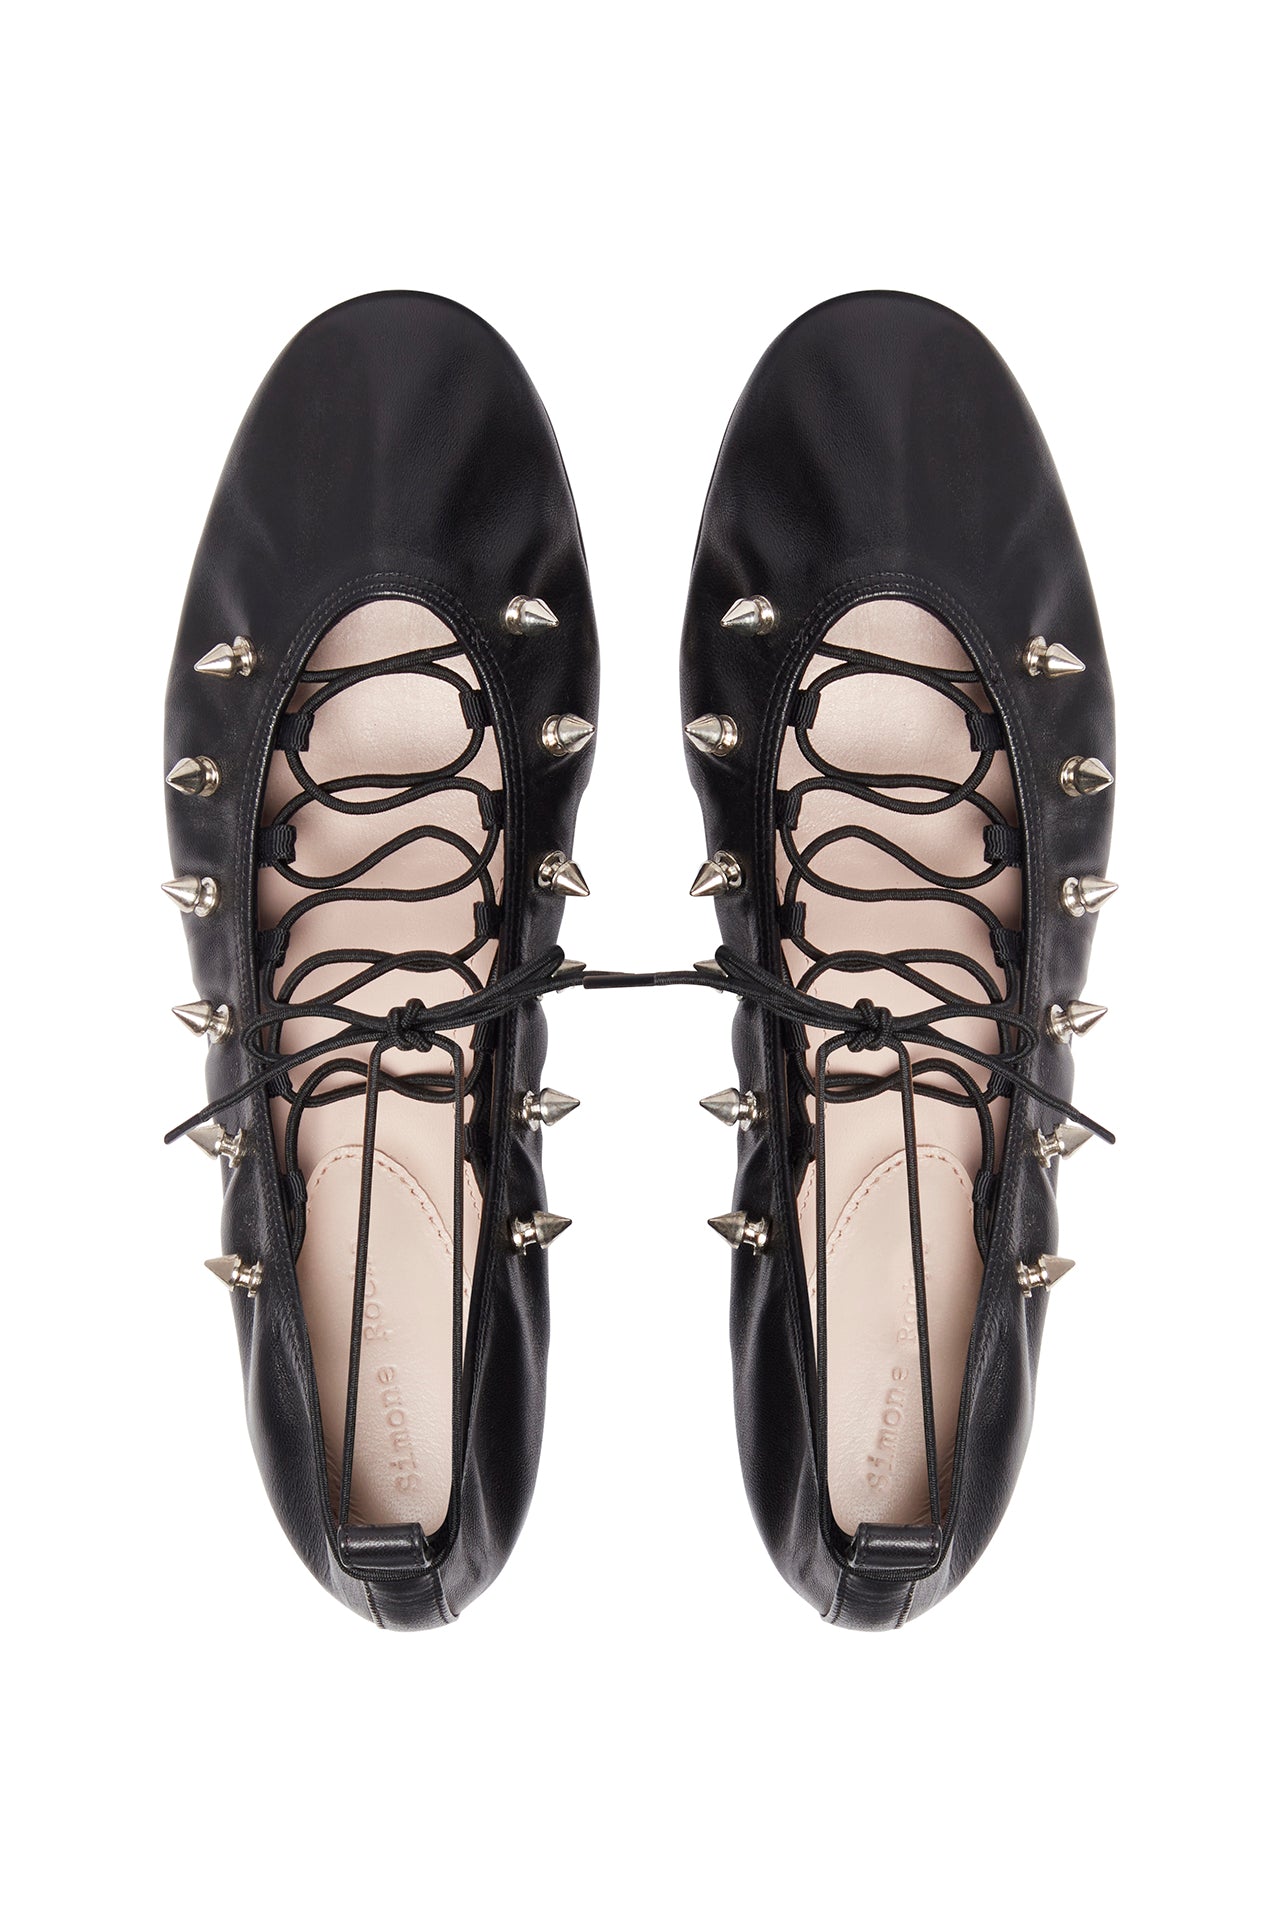 Black Elasticated Laces Round Pump with Studs